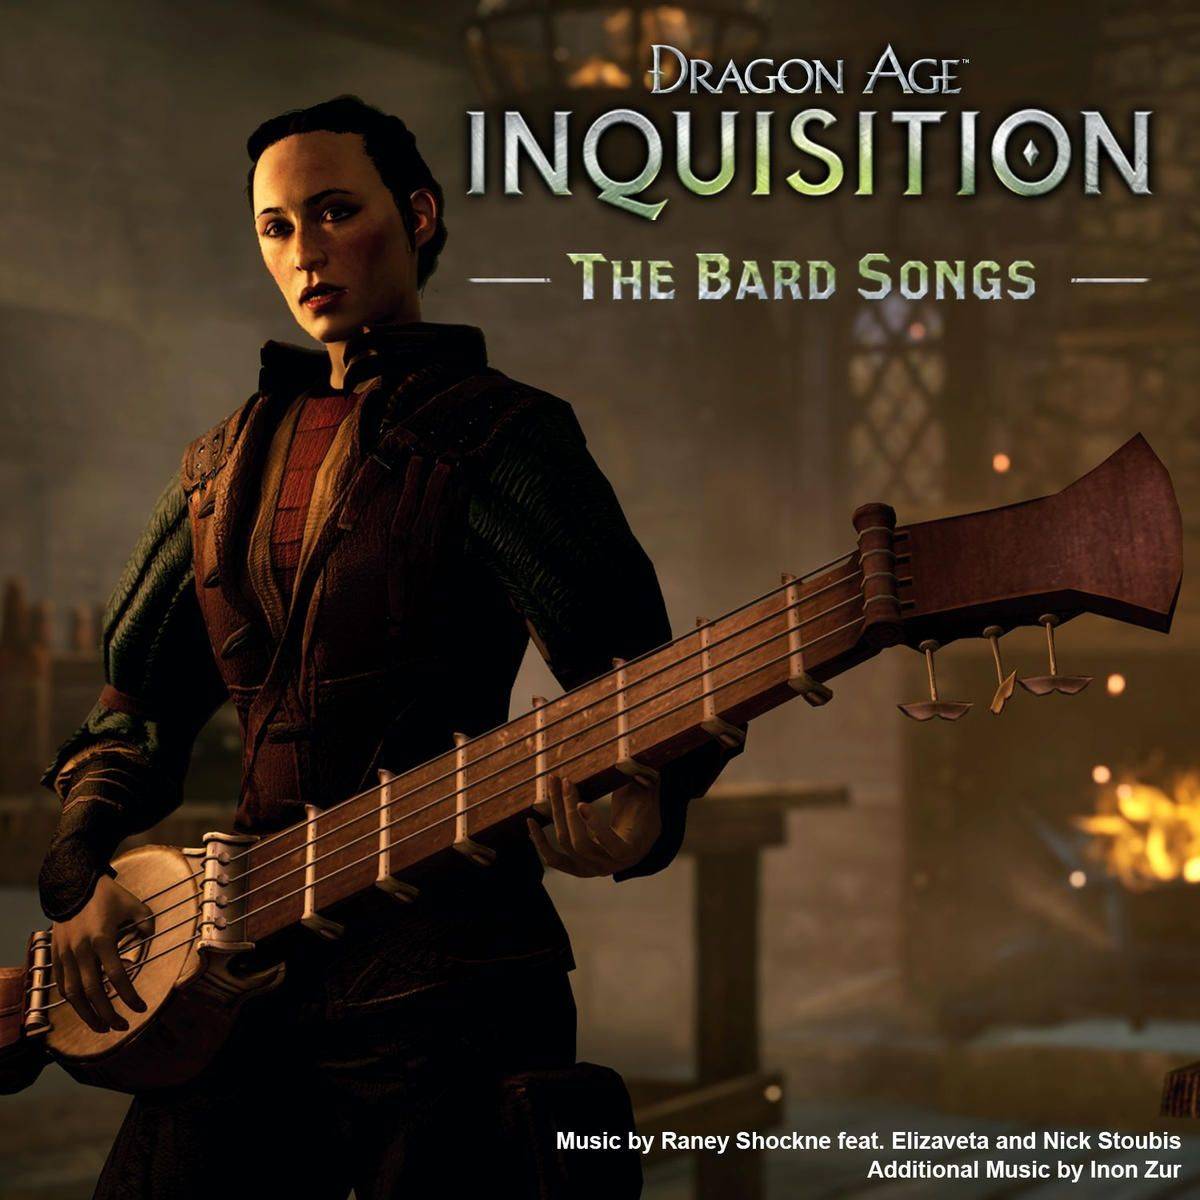 Dragon Age Inquisition - The Bard Songs